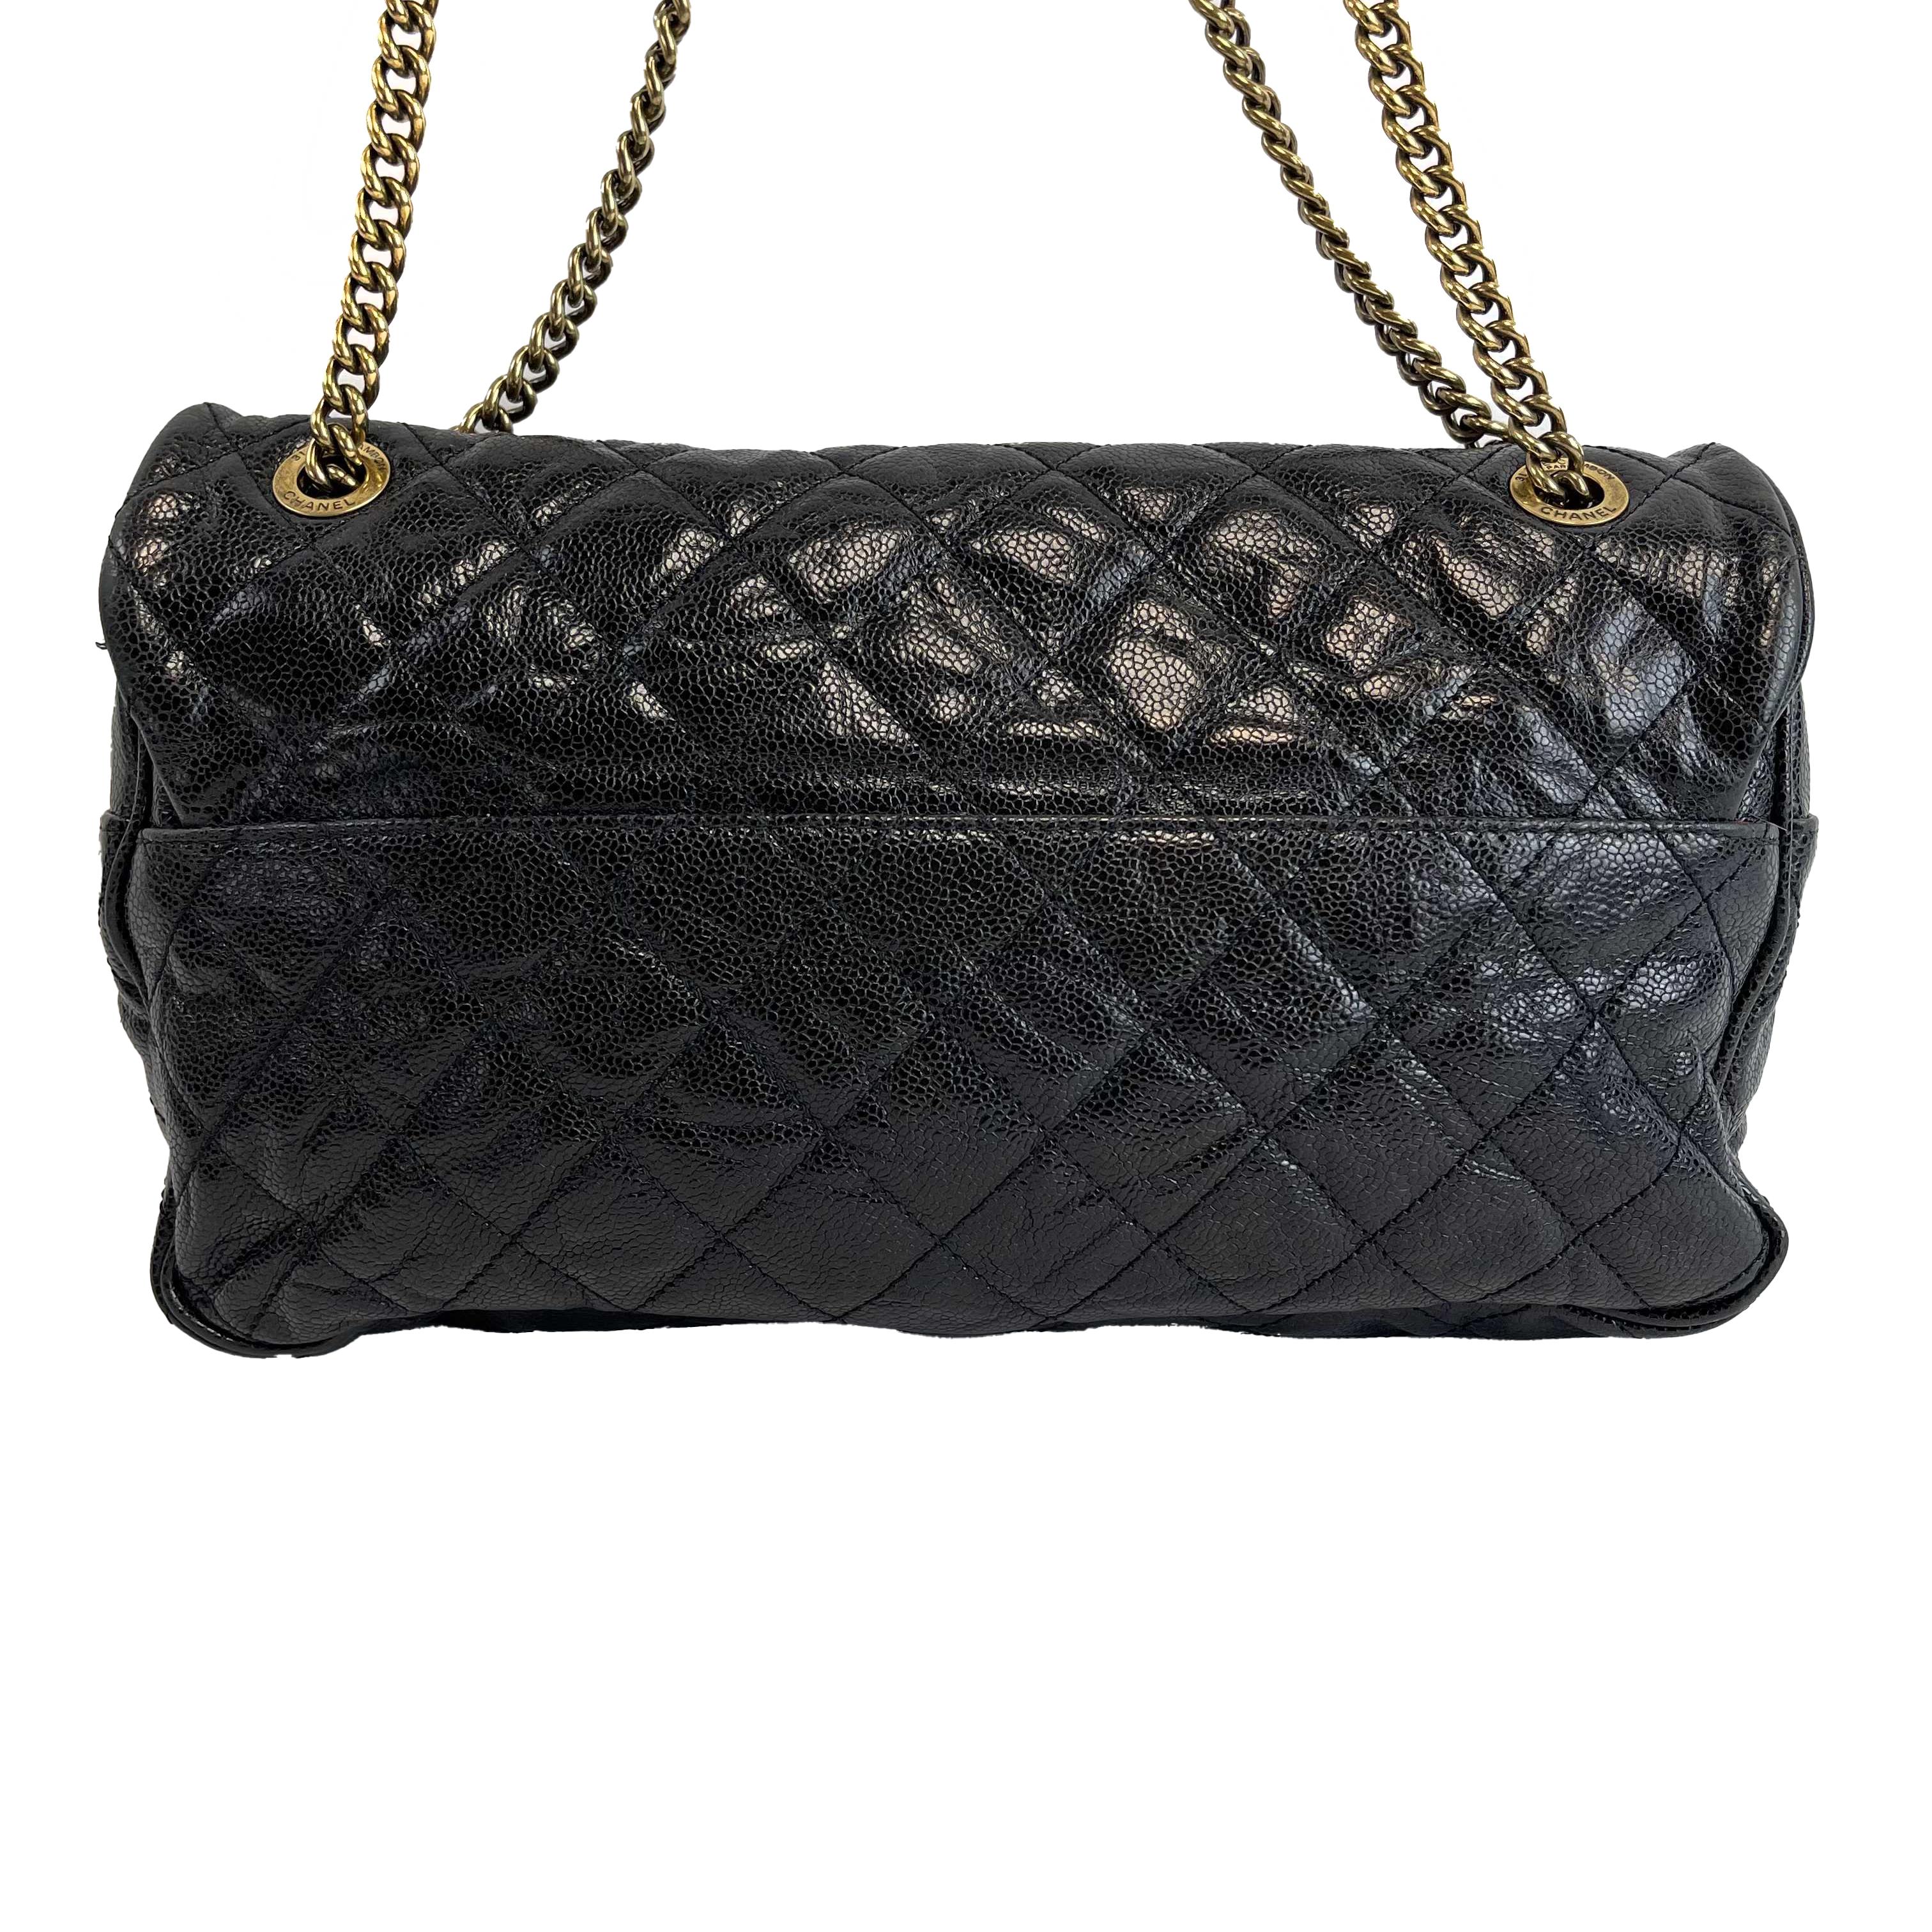 Chanel - Shiva Flap Bag Quilted Caviar Large Black CC Shoulder Bag
Measurements

Width: 12.5 in / 31.75 cm
Height: 6 in / 15.24 cm
Depth: 3 in / 7.62 cm
Strap Drop: 19 in / 48.26 cm
Handle Drop: 10.5 in / 26.67 cm
Details

Made In: Italy
Color: